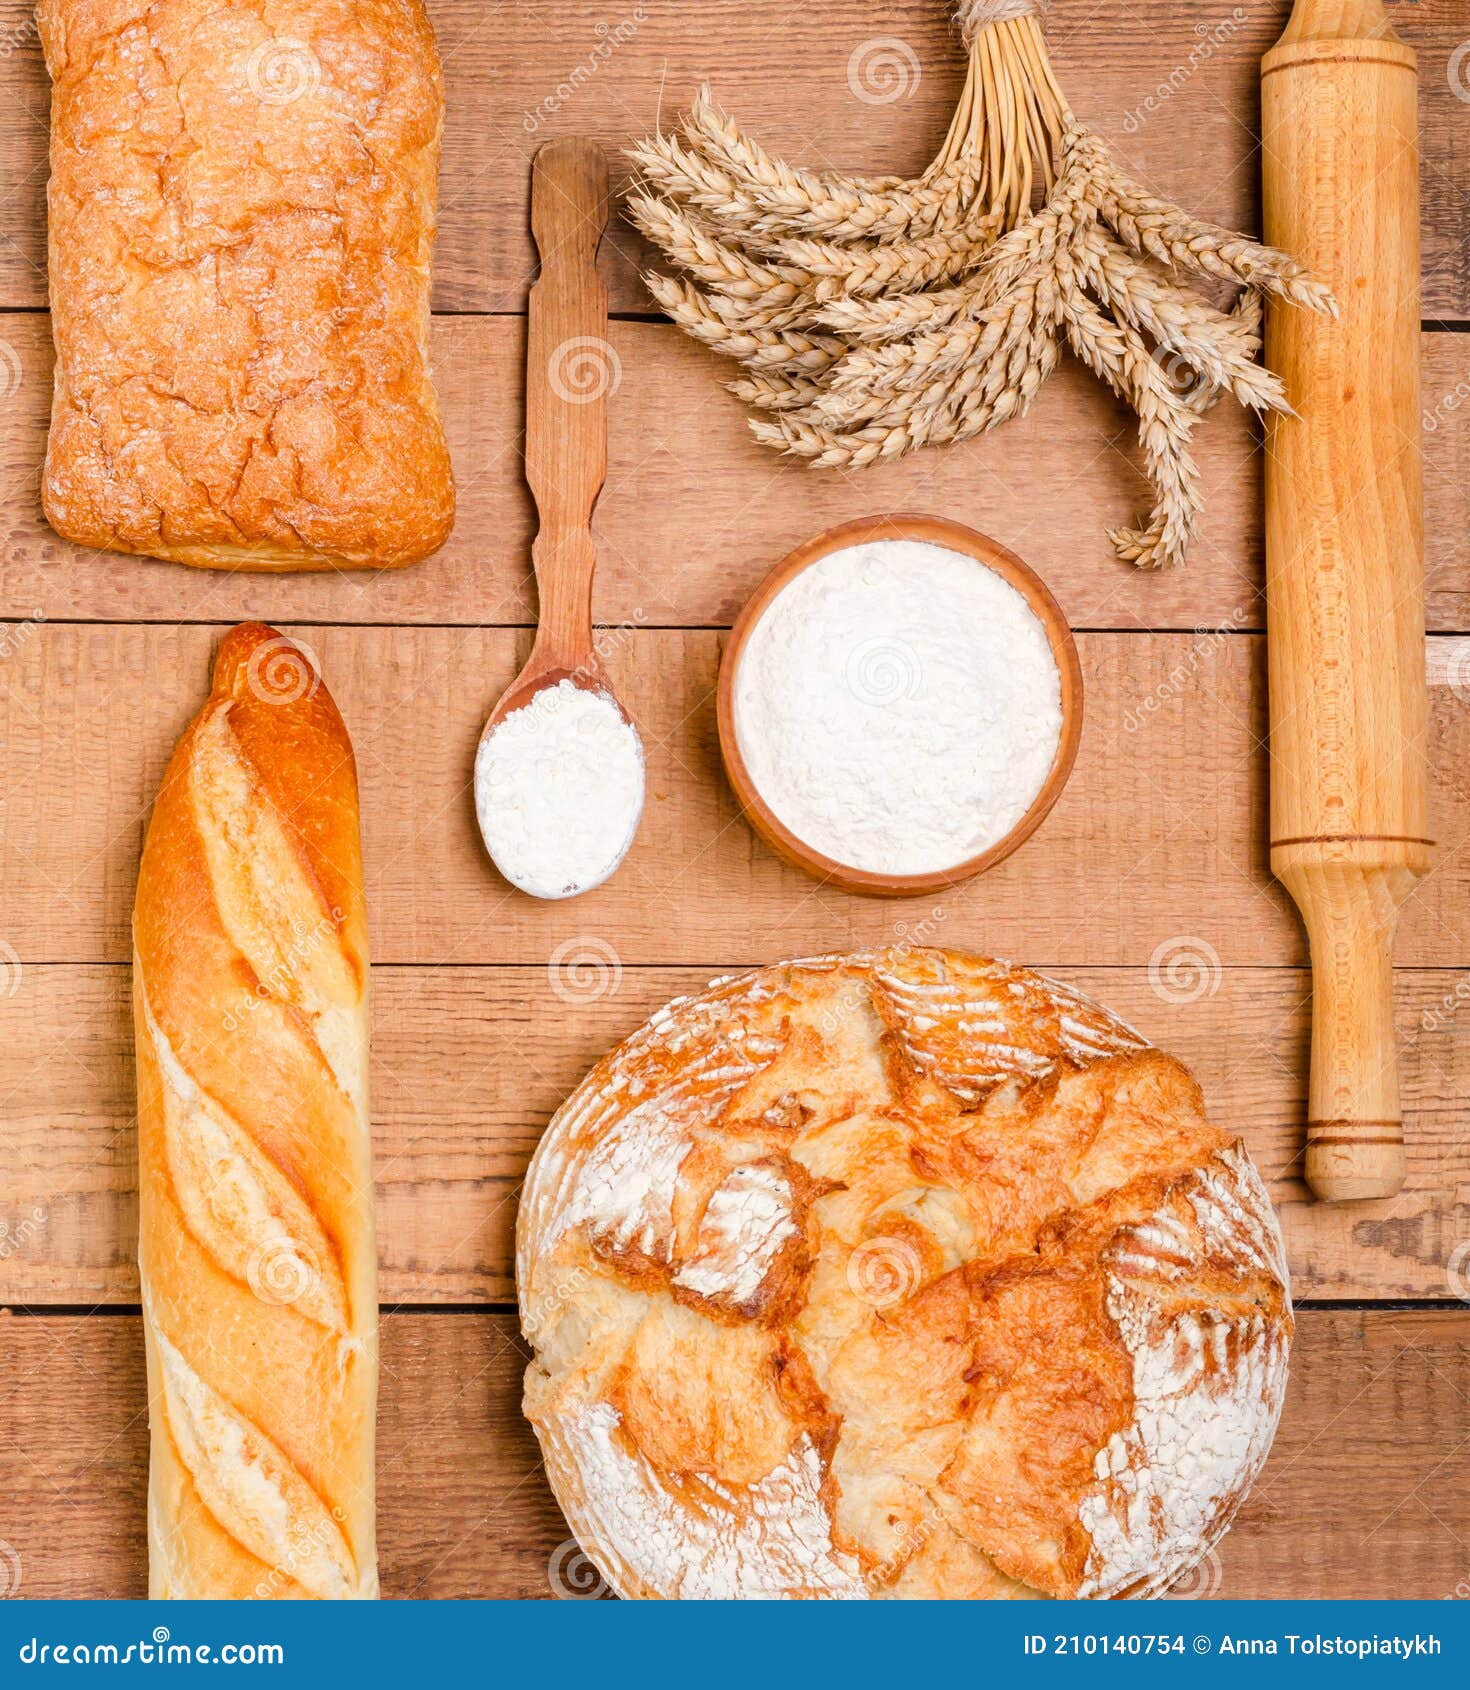 Various Loaves Of Bread On Rustic Wood Stock Image   Image Of Diet